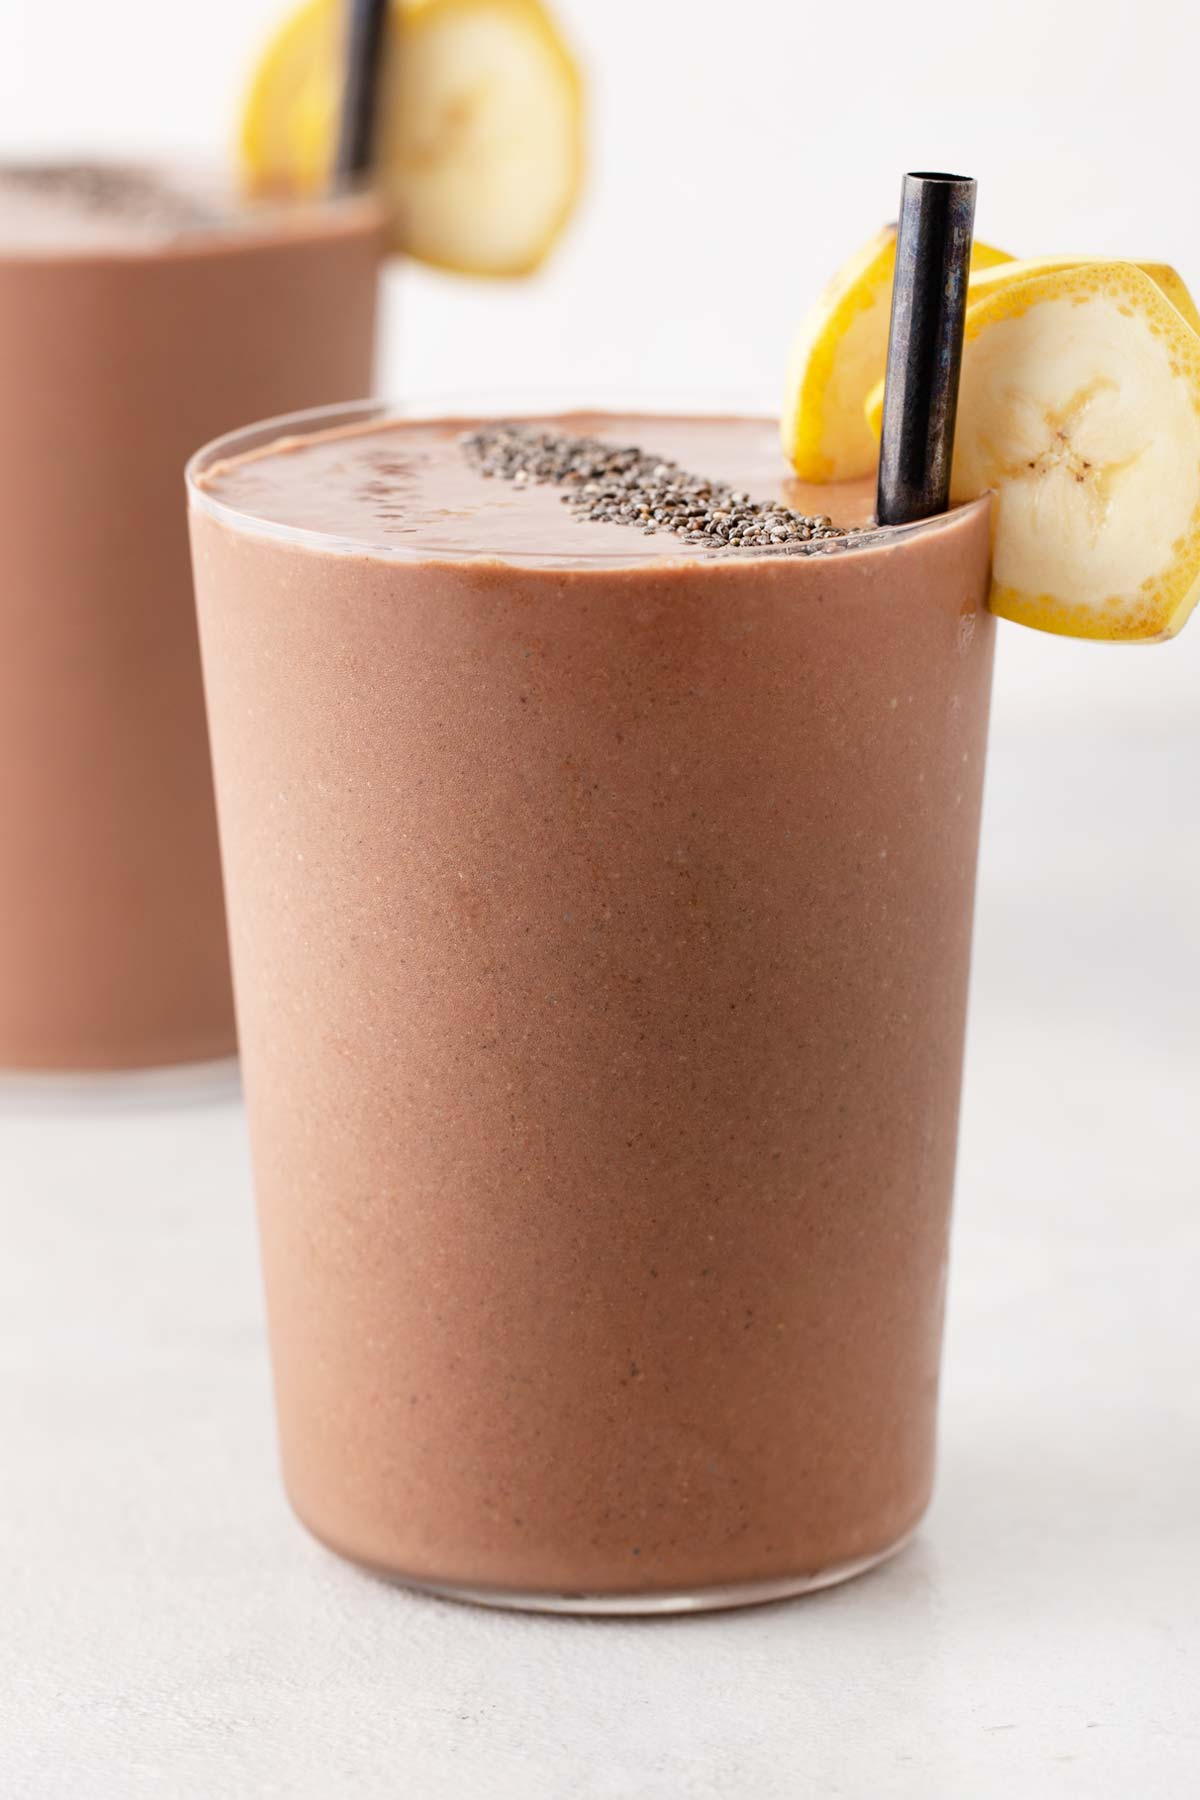 Chocolate peanut butter banana smoothie in a glass.